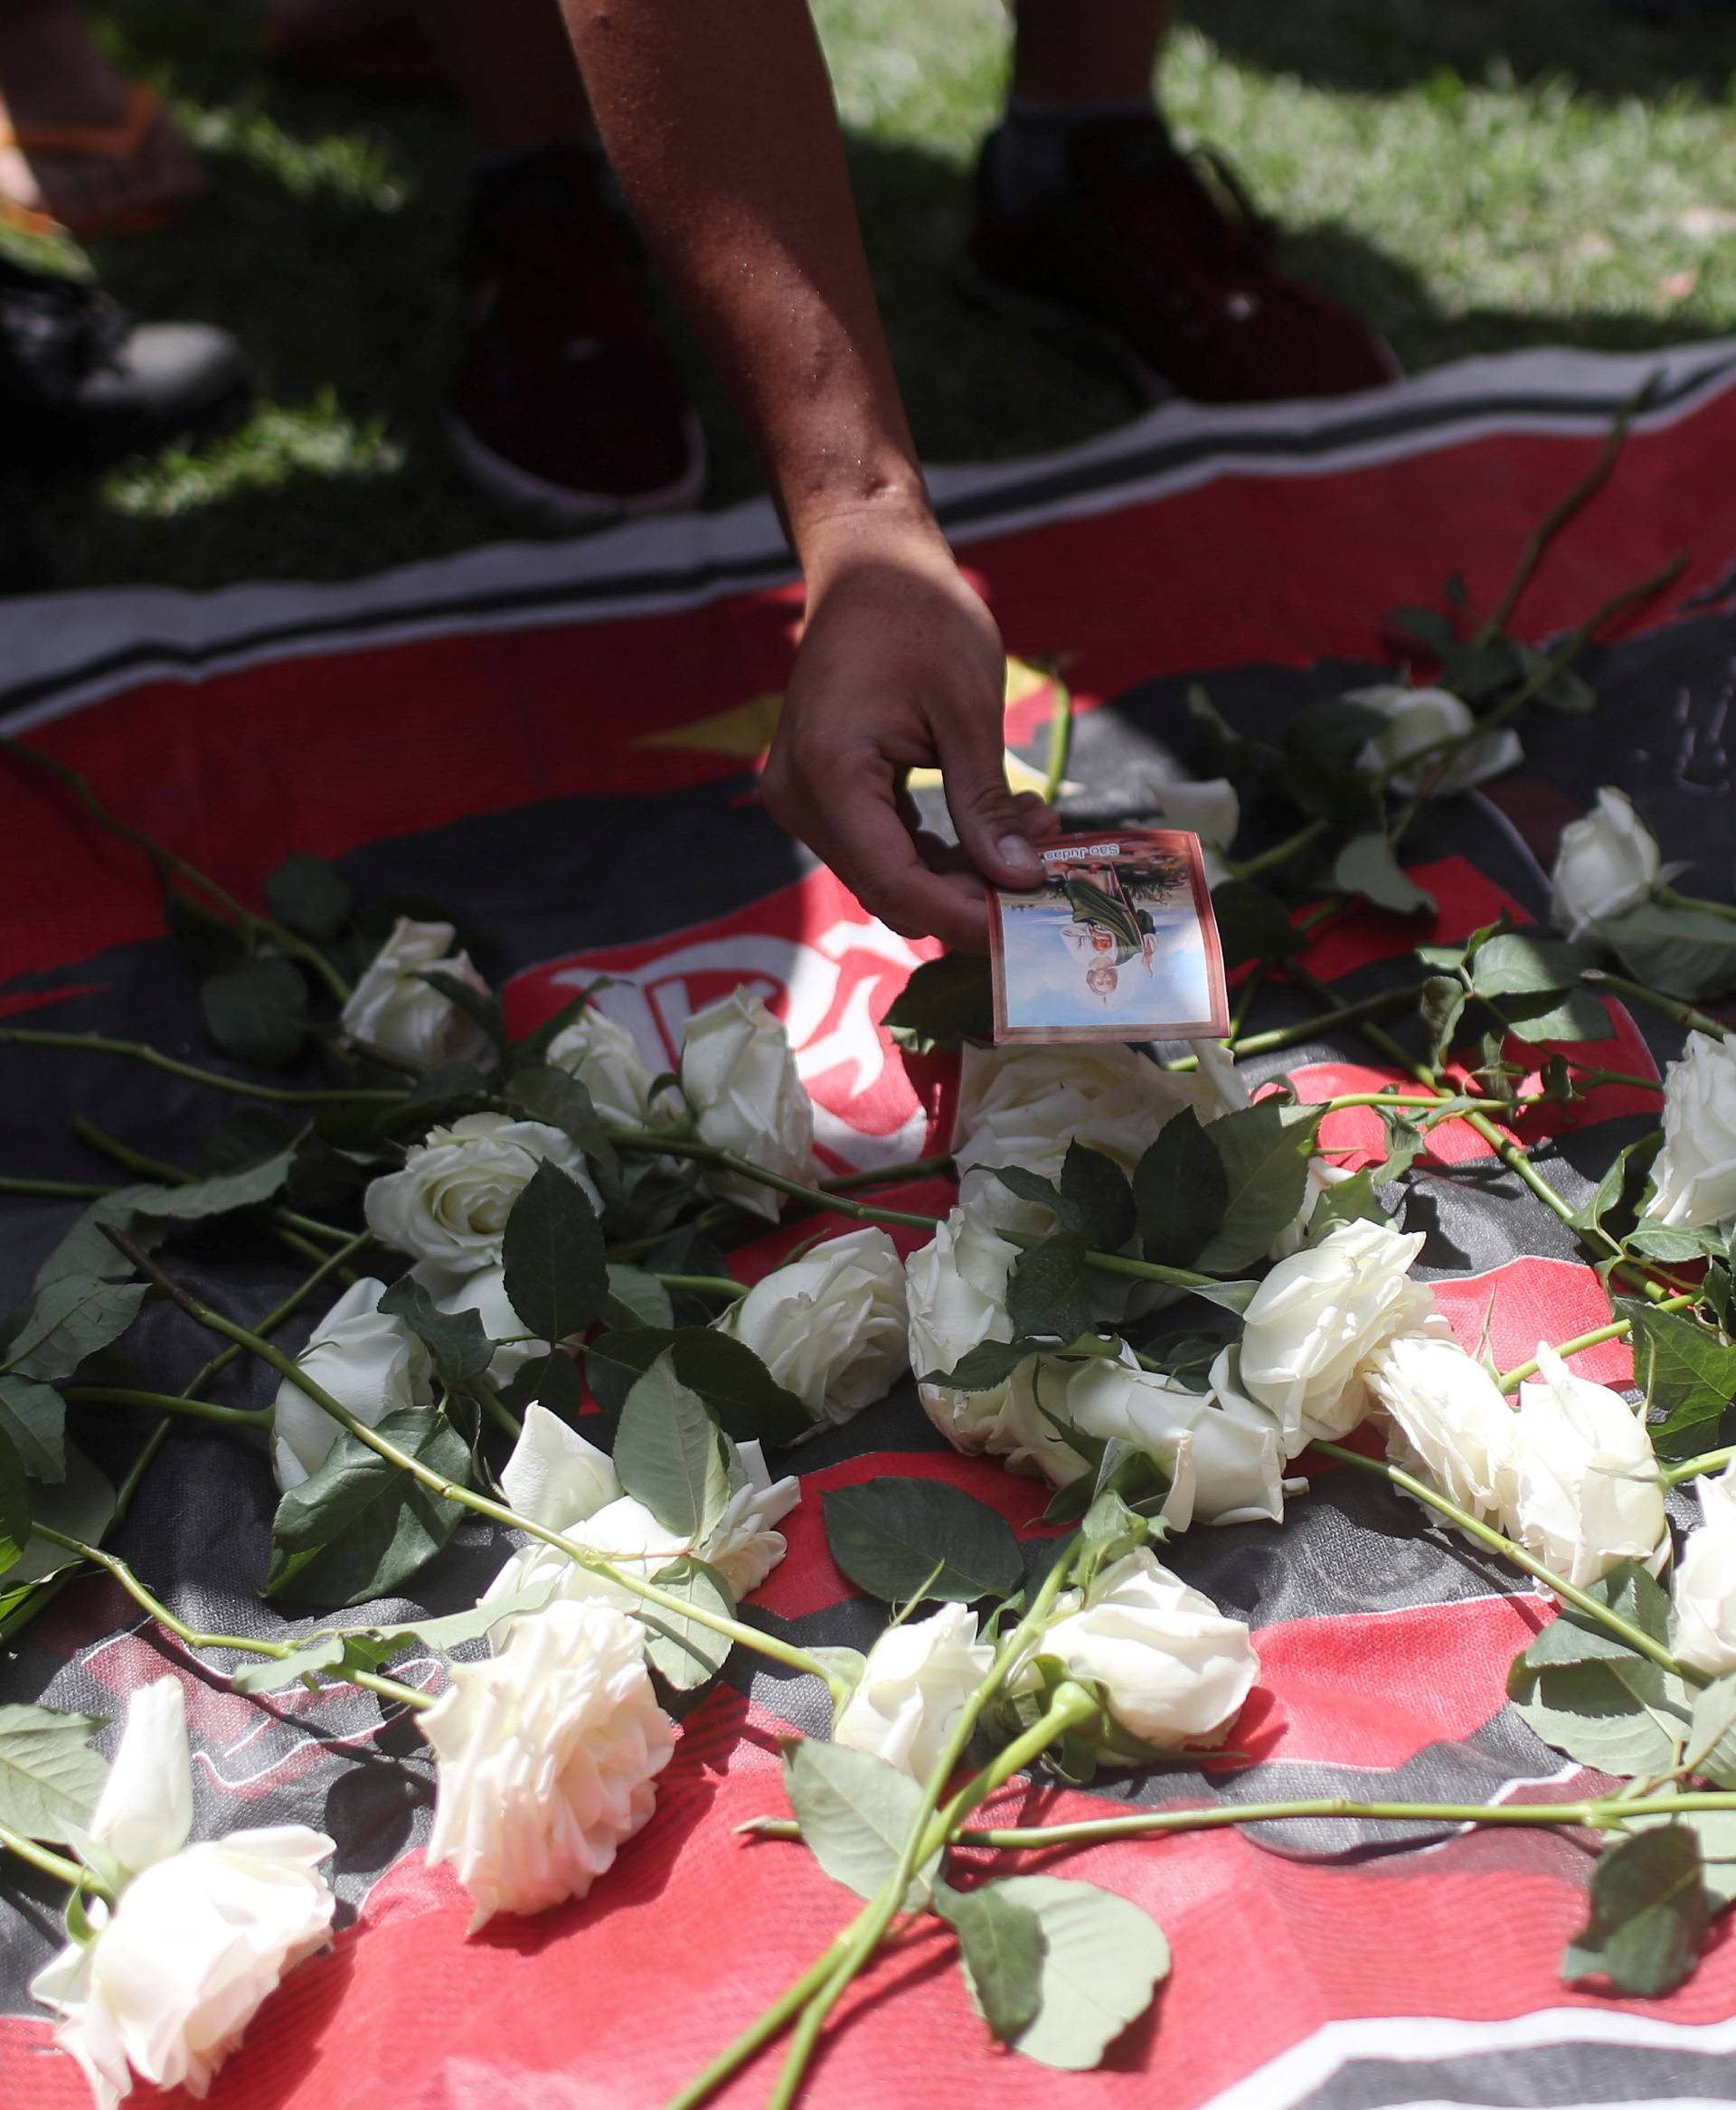 Fans of Brazilian football club Flamengo lay flowers at the club's entrance, after a deadly fire, in Rio de Janeiro